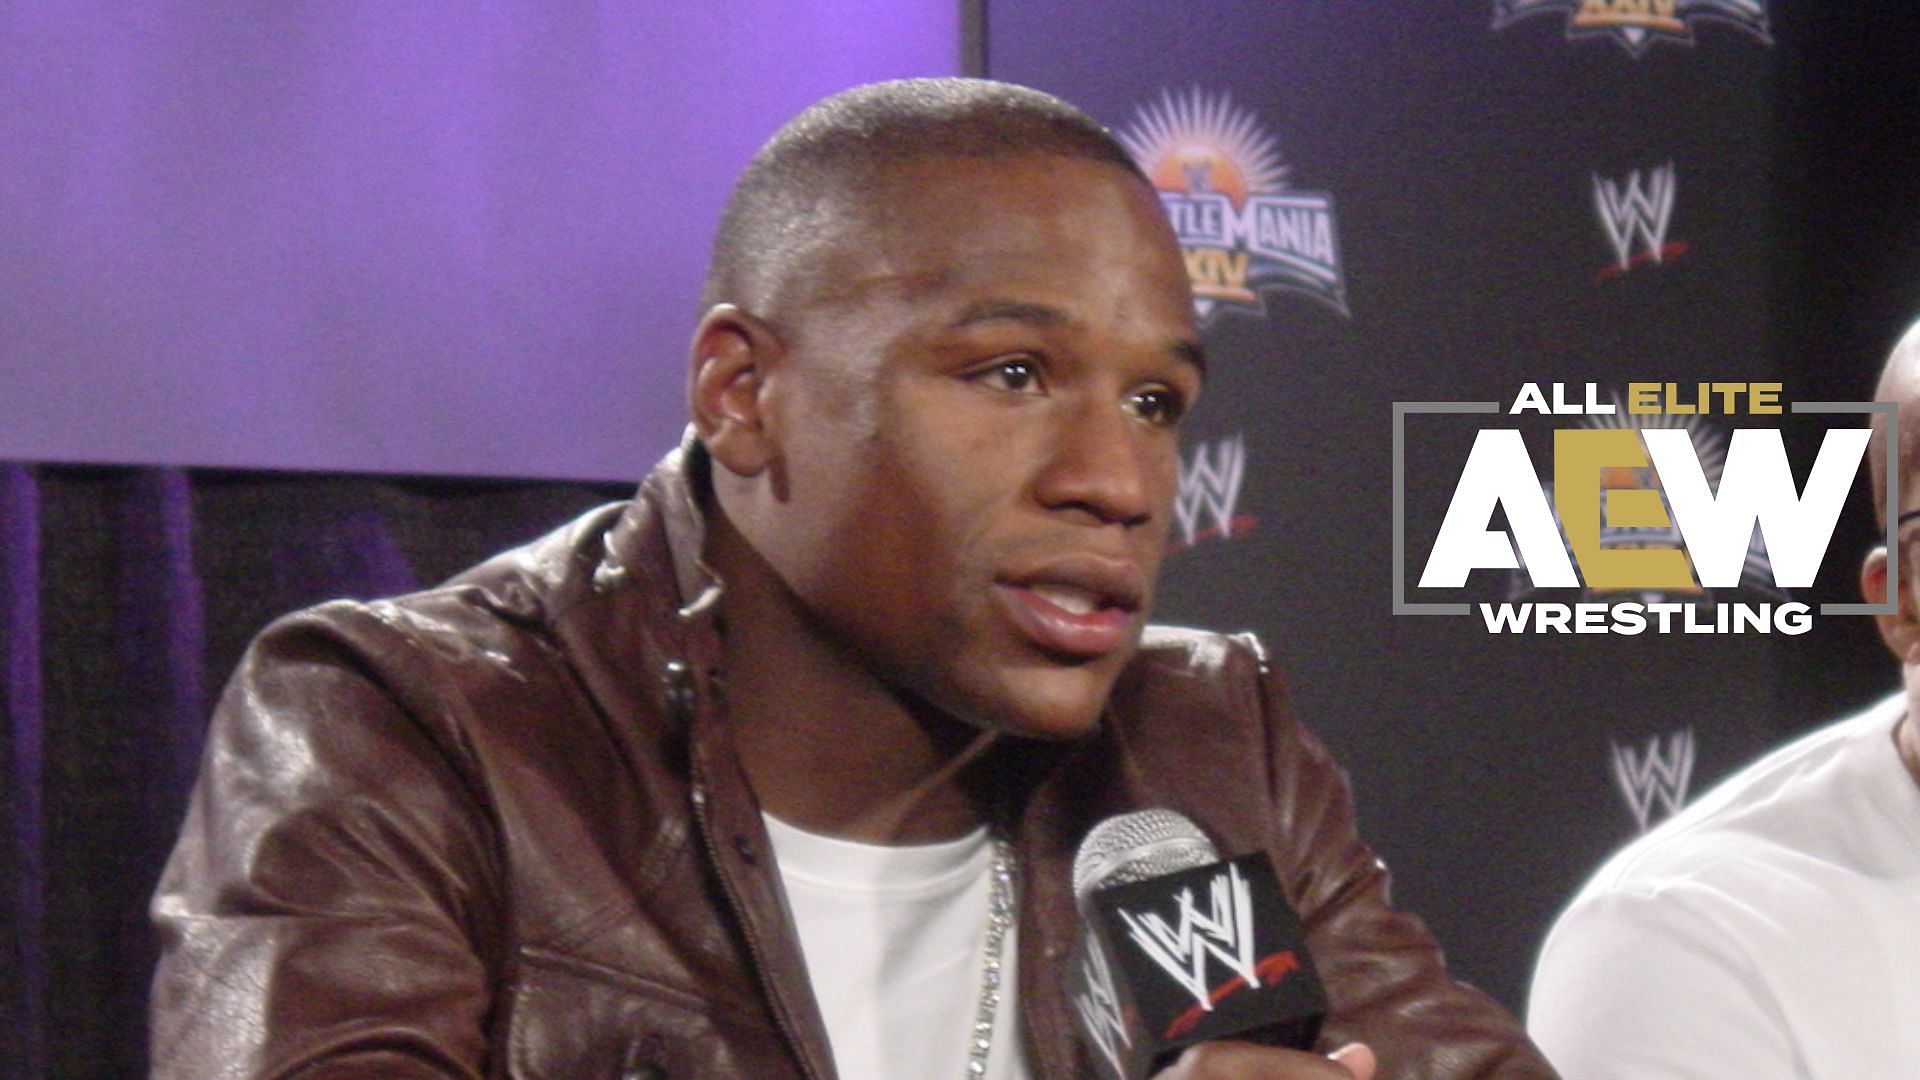 Floyd Mayweather at a WrestleMania 24 press conference in 2008